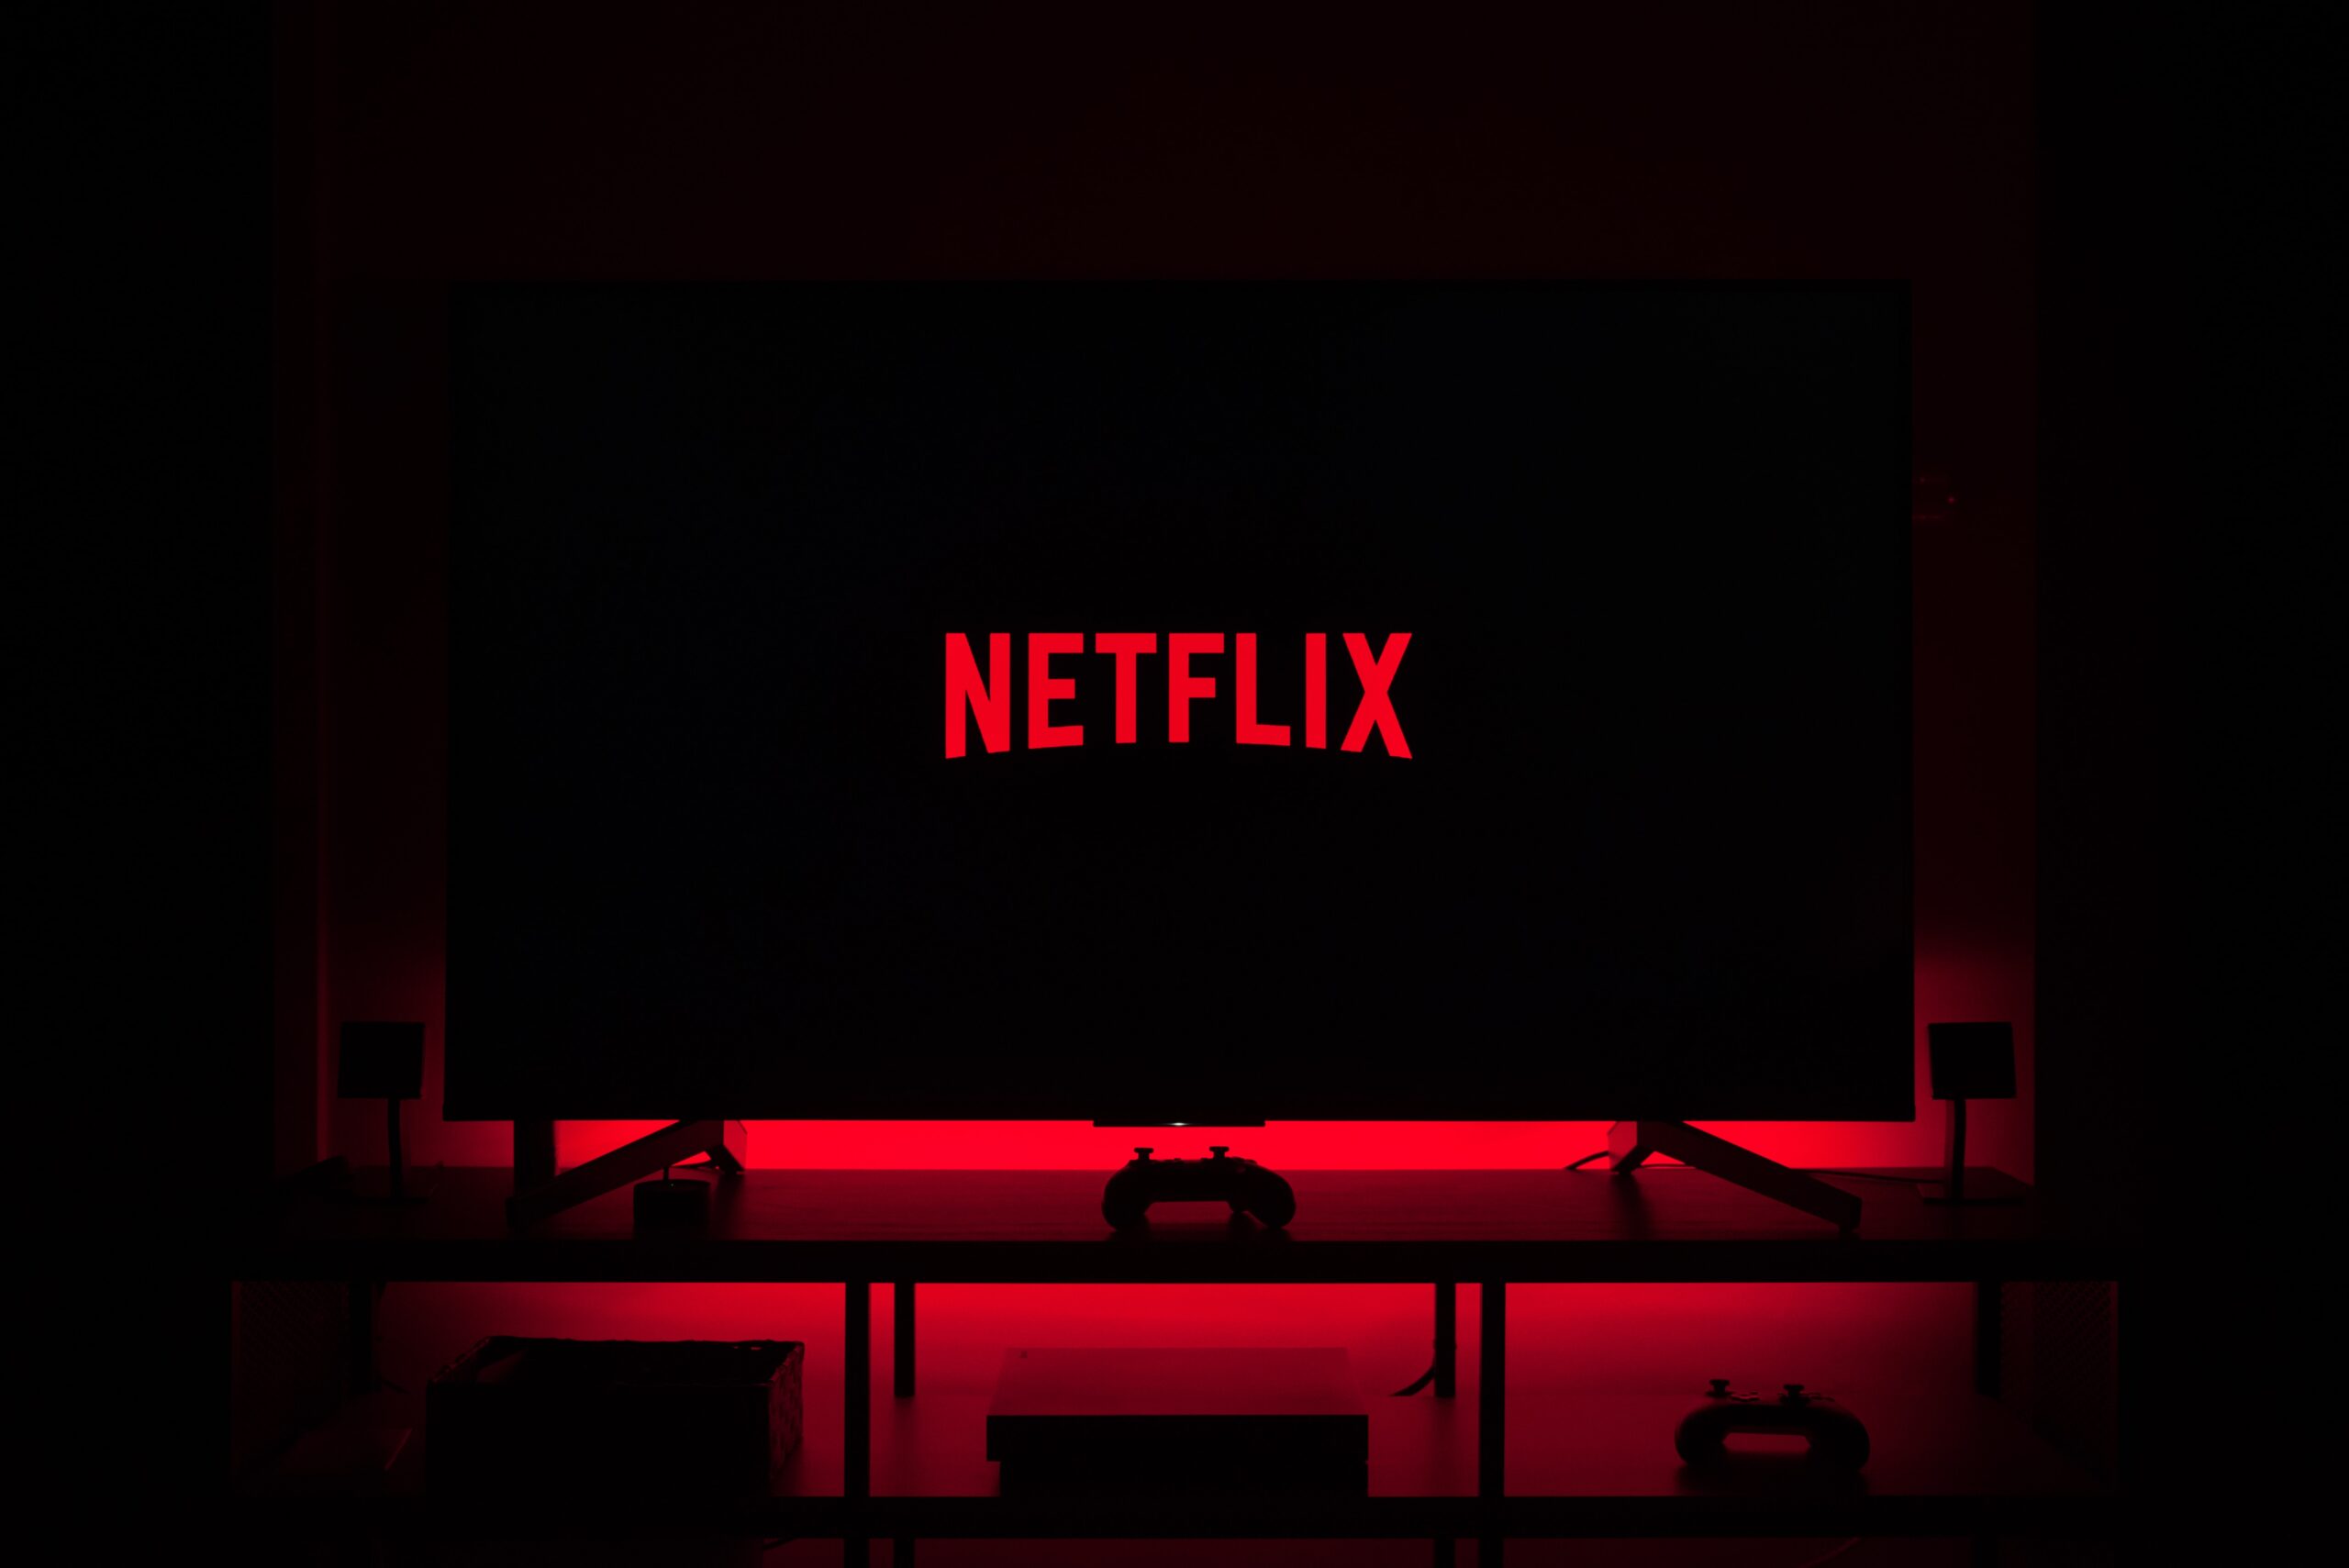 We’re about to get a peek at how many views Netflix shows get